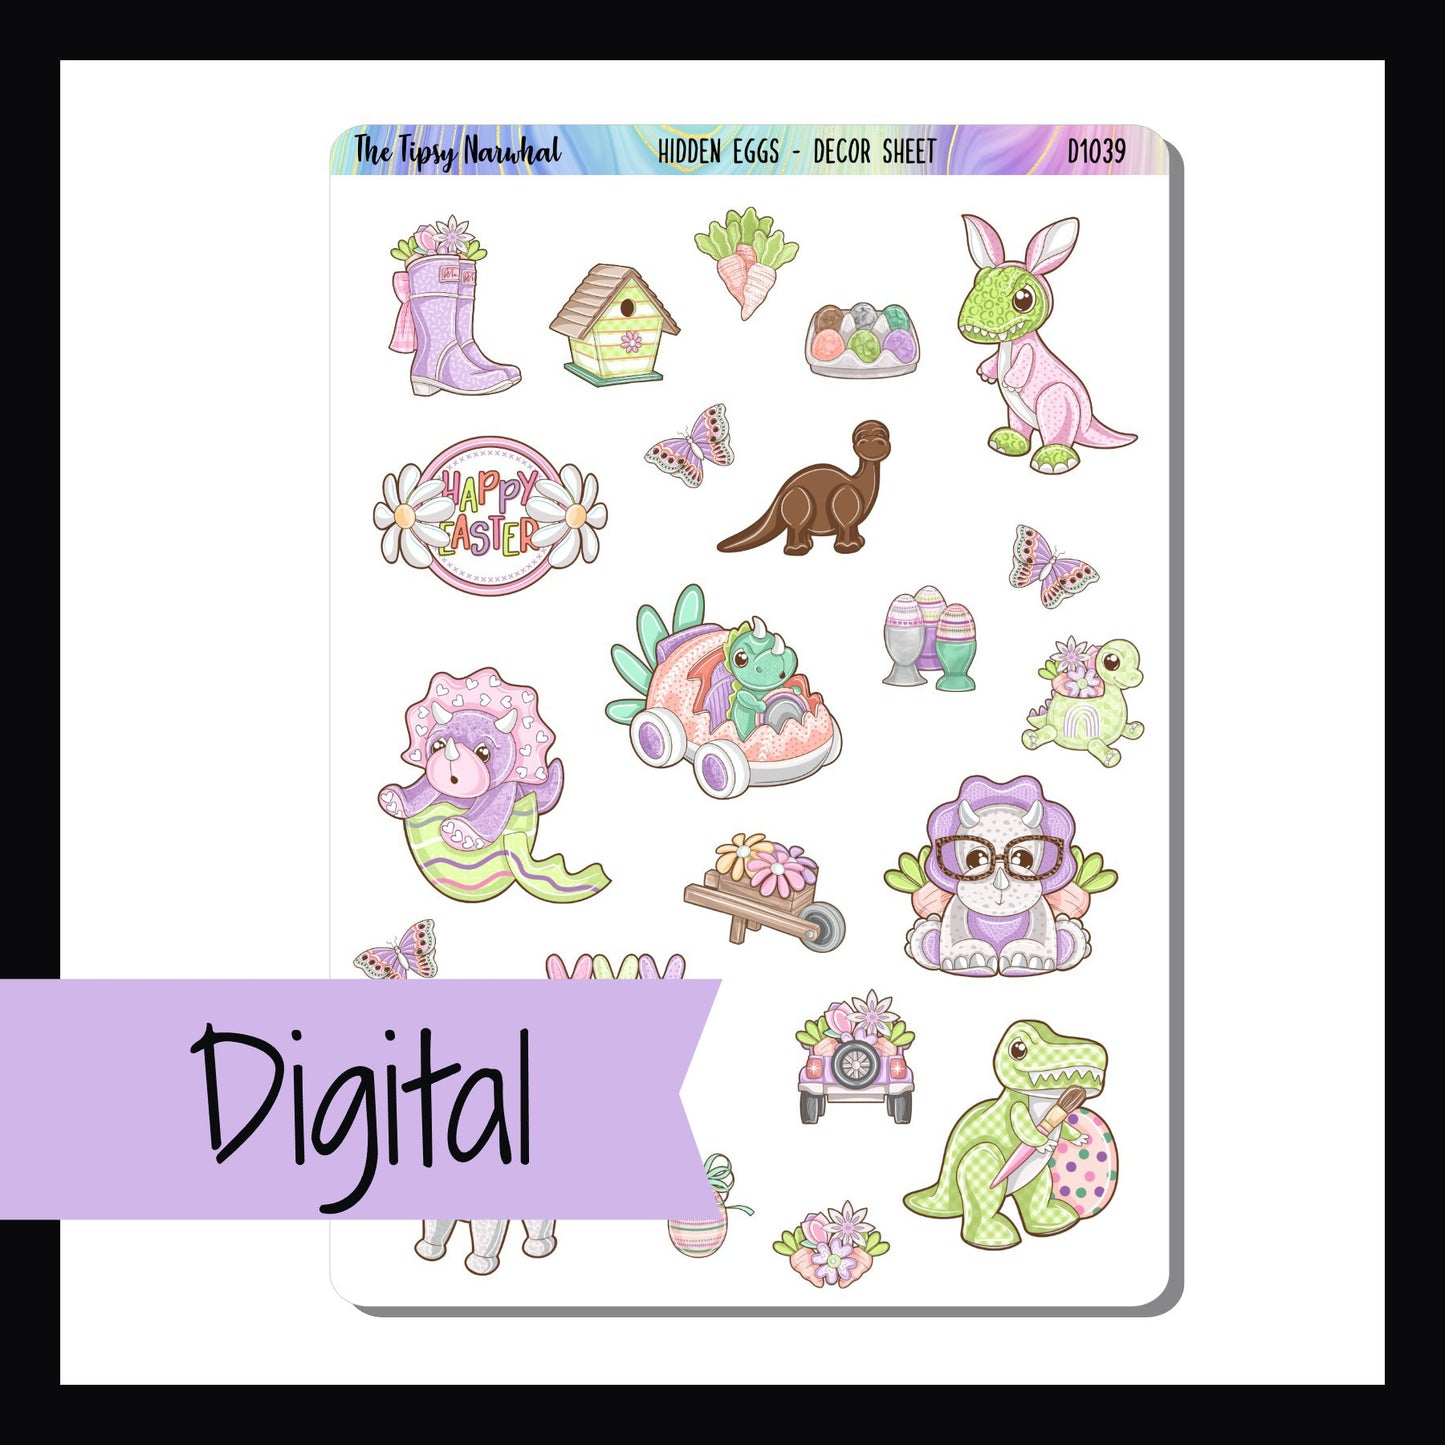 Digital Hidden Eggs Decor Sheet features various dinosaurs getting ready for the Easter holiday, spring items such as flowers, butterflies and eggs. 